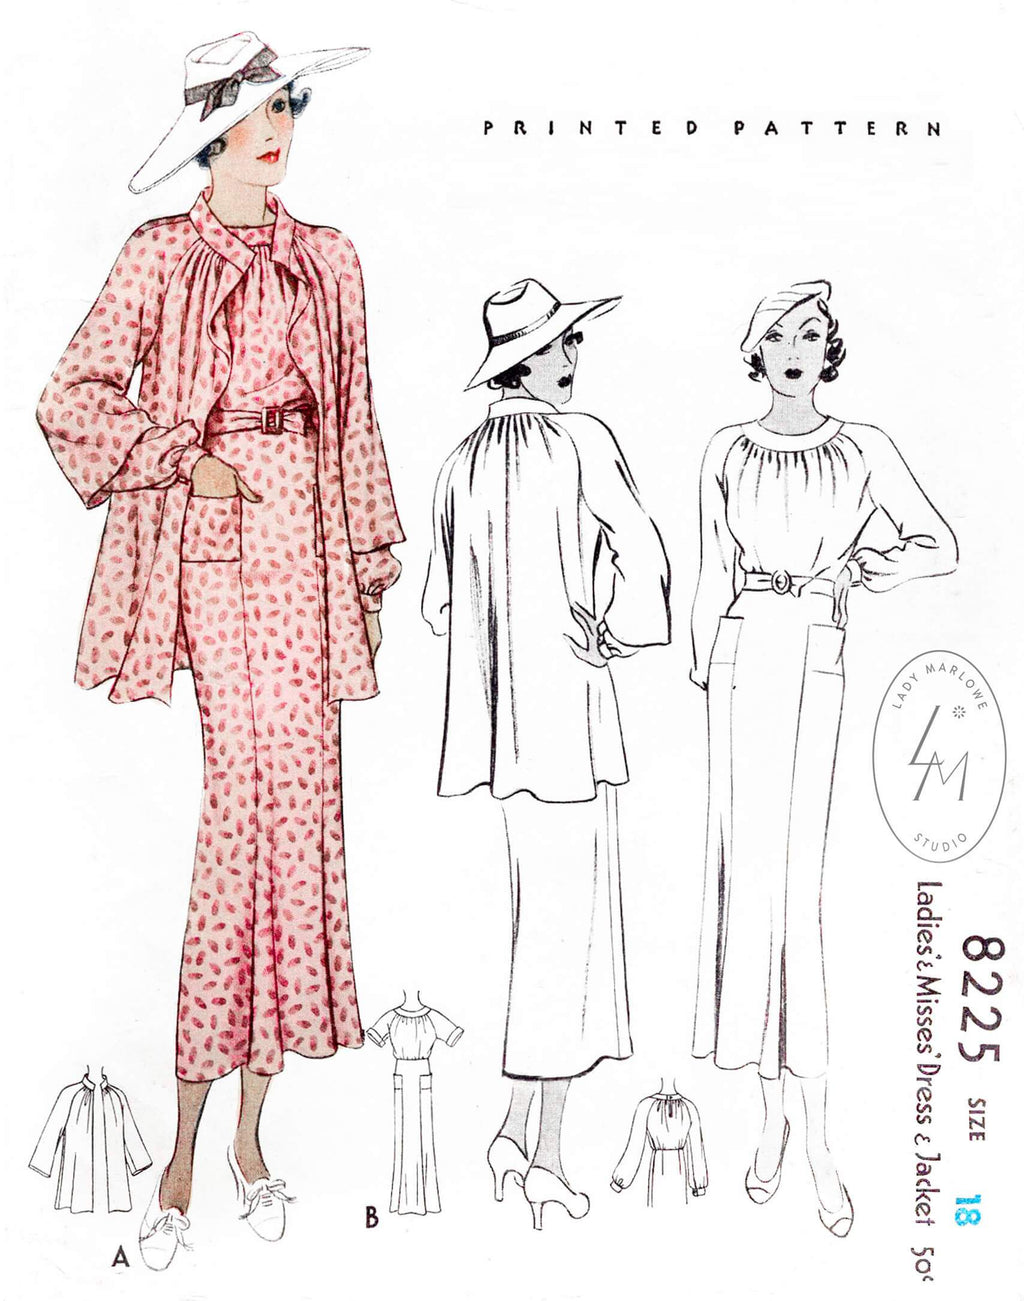 McCall 8225 1930s 1935 dress and jacket raglan sleeves vintage sewing pattern reproduction